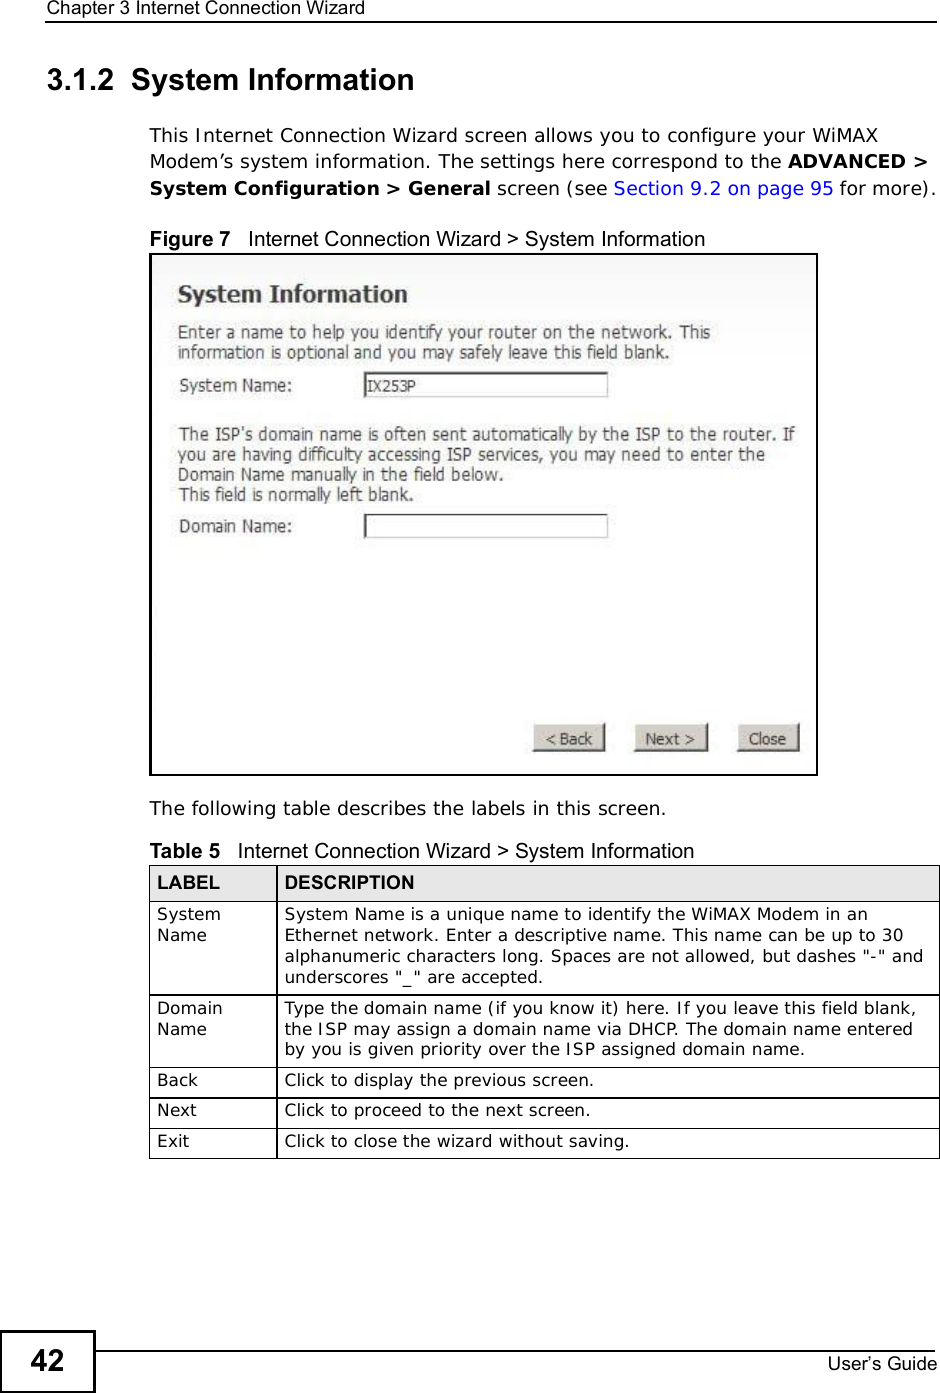 Chapter 3Internet Connection WizardUser s Guide423.1.2  System InformationThis Internet Connection Wizard screen allows you to configure your WiMAX Modem’s system information. The settings here correspond to the ADVANCED &gt; System Configuration &gt; General screen (see Section 9.2 on page 95 for more).Figure 7   Internet Connection Wizard &gt; System InformationThe following table describes the labels in this screen.Table 5   Internet Connection Wizard &gt; System InformationLABEL DESCRIPTIONSystem Name System Name is a unique name to identify the WiMAX Modem in an Ethernet network. Enter a descriptive name. This name can be up to 30 alphanumeric characters long. Spaces are not allowed, but dashes &quot;-&quot; and underscores &quot;_&quot; are accepted. DomainName Type the domain name (if you know it) here. If you leave this field blank, the ISP may assign a domain name via DHCP. The domain name entered by you is given priority over the ISP assigned domain name.Back Click to display the previous screen.Next Click to proceed to the next screen. Exit Click to close the wizard without saving.